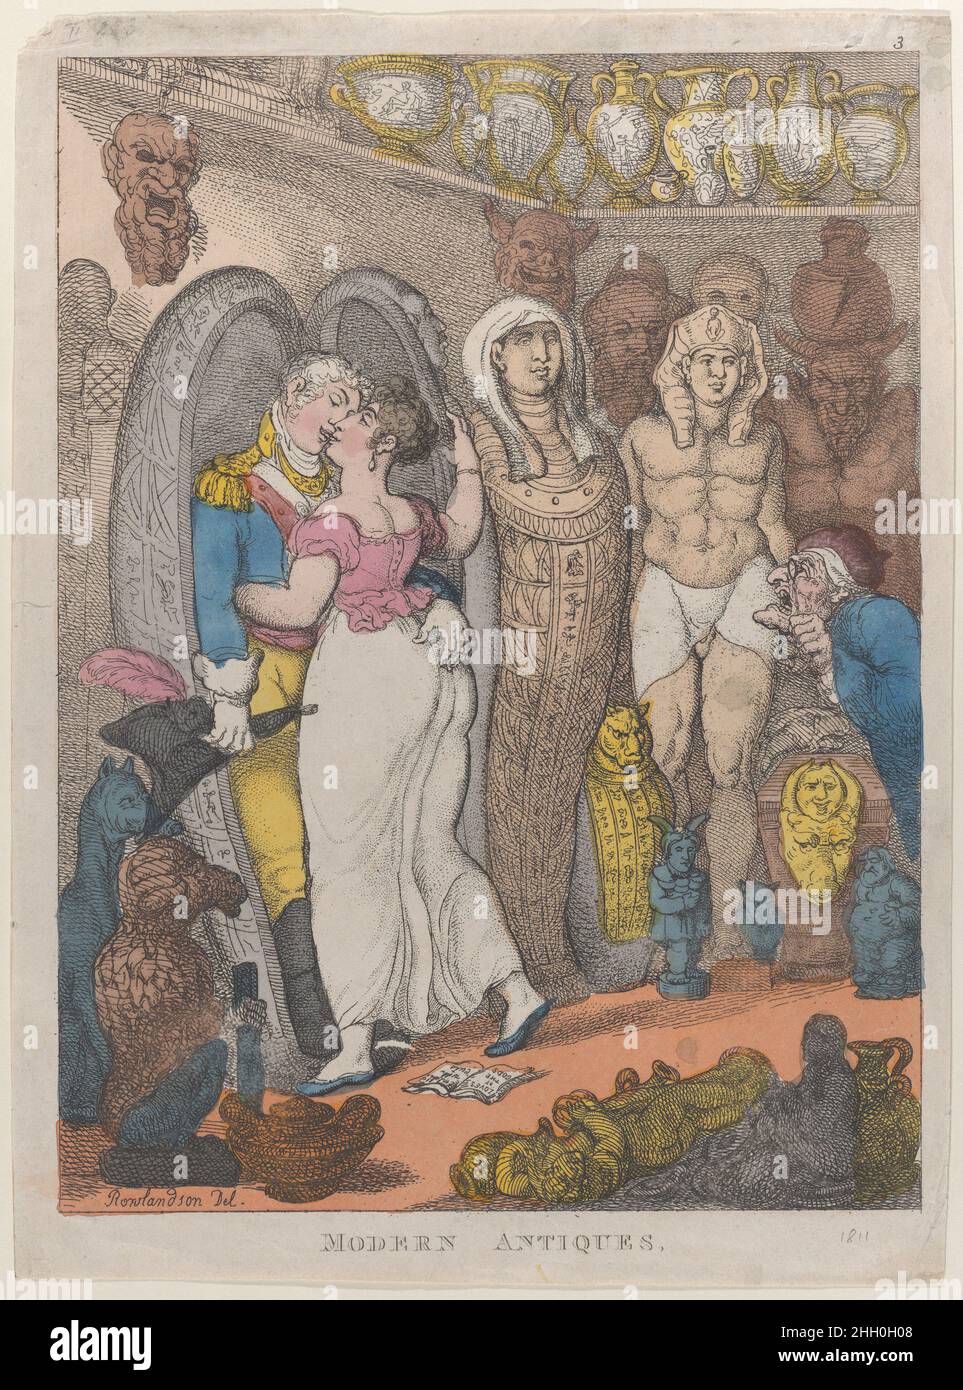 Modern Antiquities 1811? Thomas Rowlandson British Among a collection of Egyptian and classical antiques a young woman is embraced by an officer, who draws her into a mummy case. Also in the room is an elderly man with a monocle who inspects a sarcophagus. On the floor an open book reads: 'Loves of the Gods, embell'd with Cuts'. Modern Antiquities. Thomas Rowlandson (British, London 1757–1827 London). 1811?. Hand-colored etching. (?) Thomas Tegg (British, 1776–1846). Prints Stock Photo